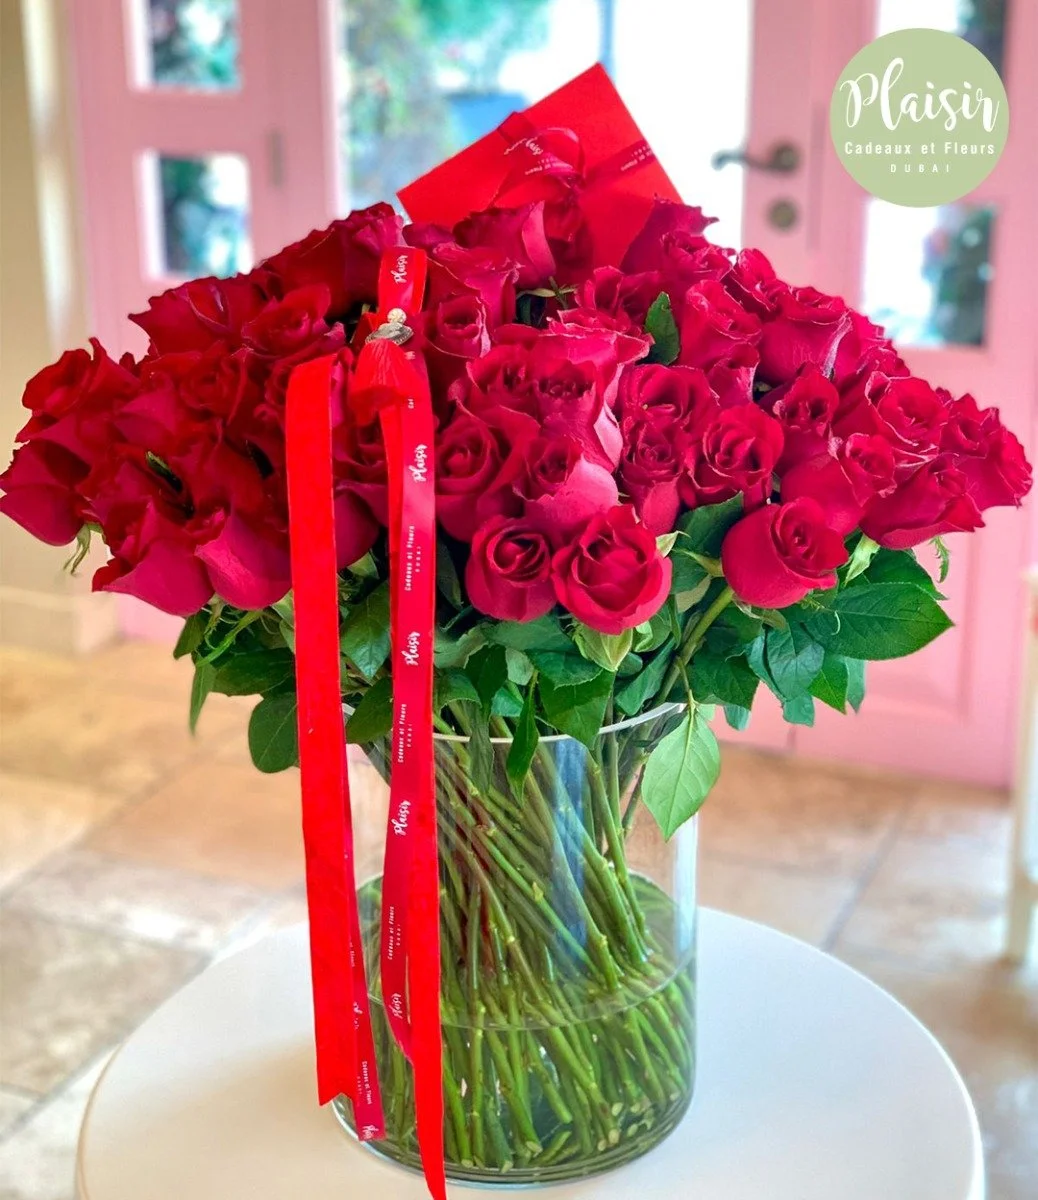 65 Exquisite Red Roses in Vase By Plaisir